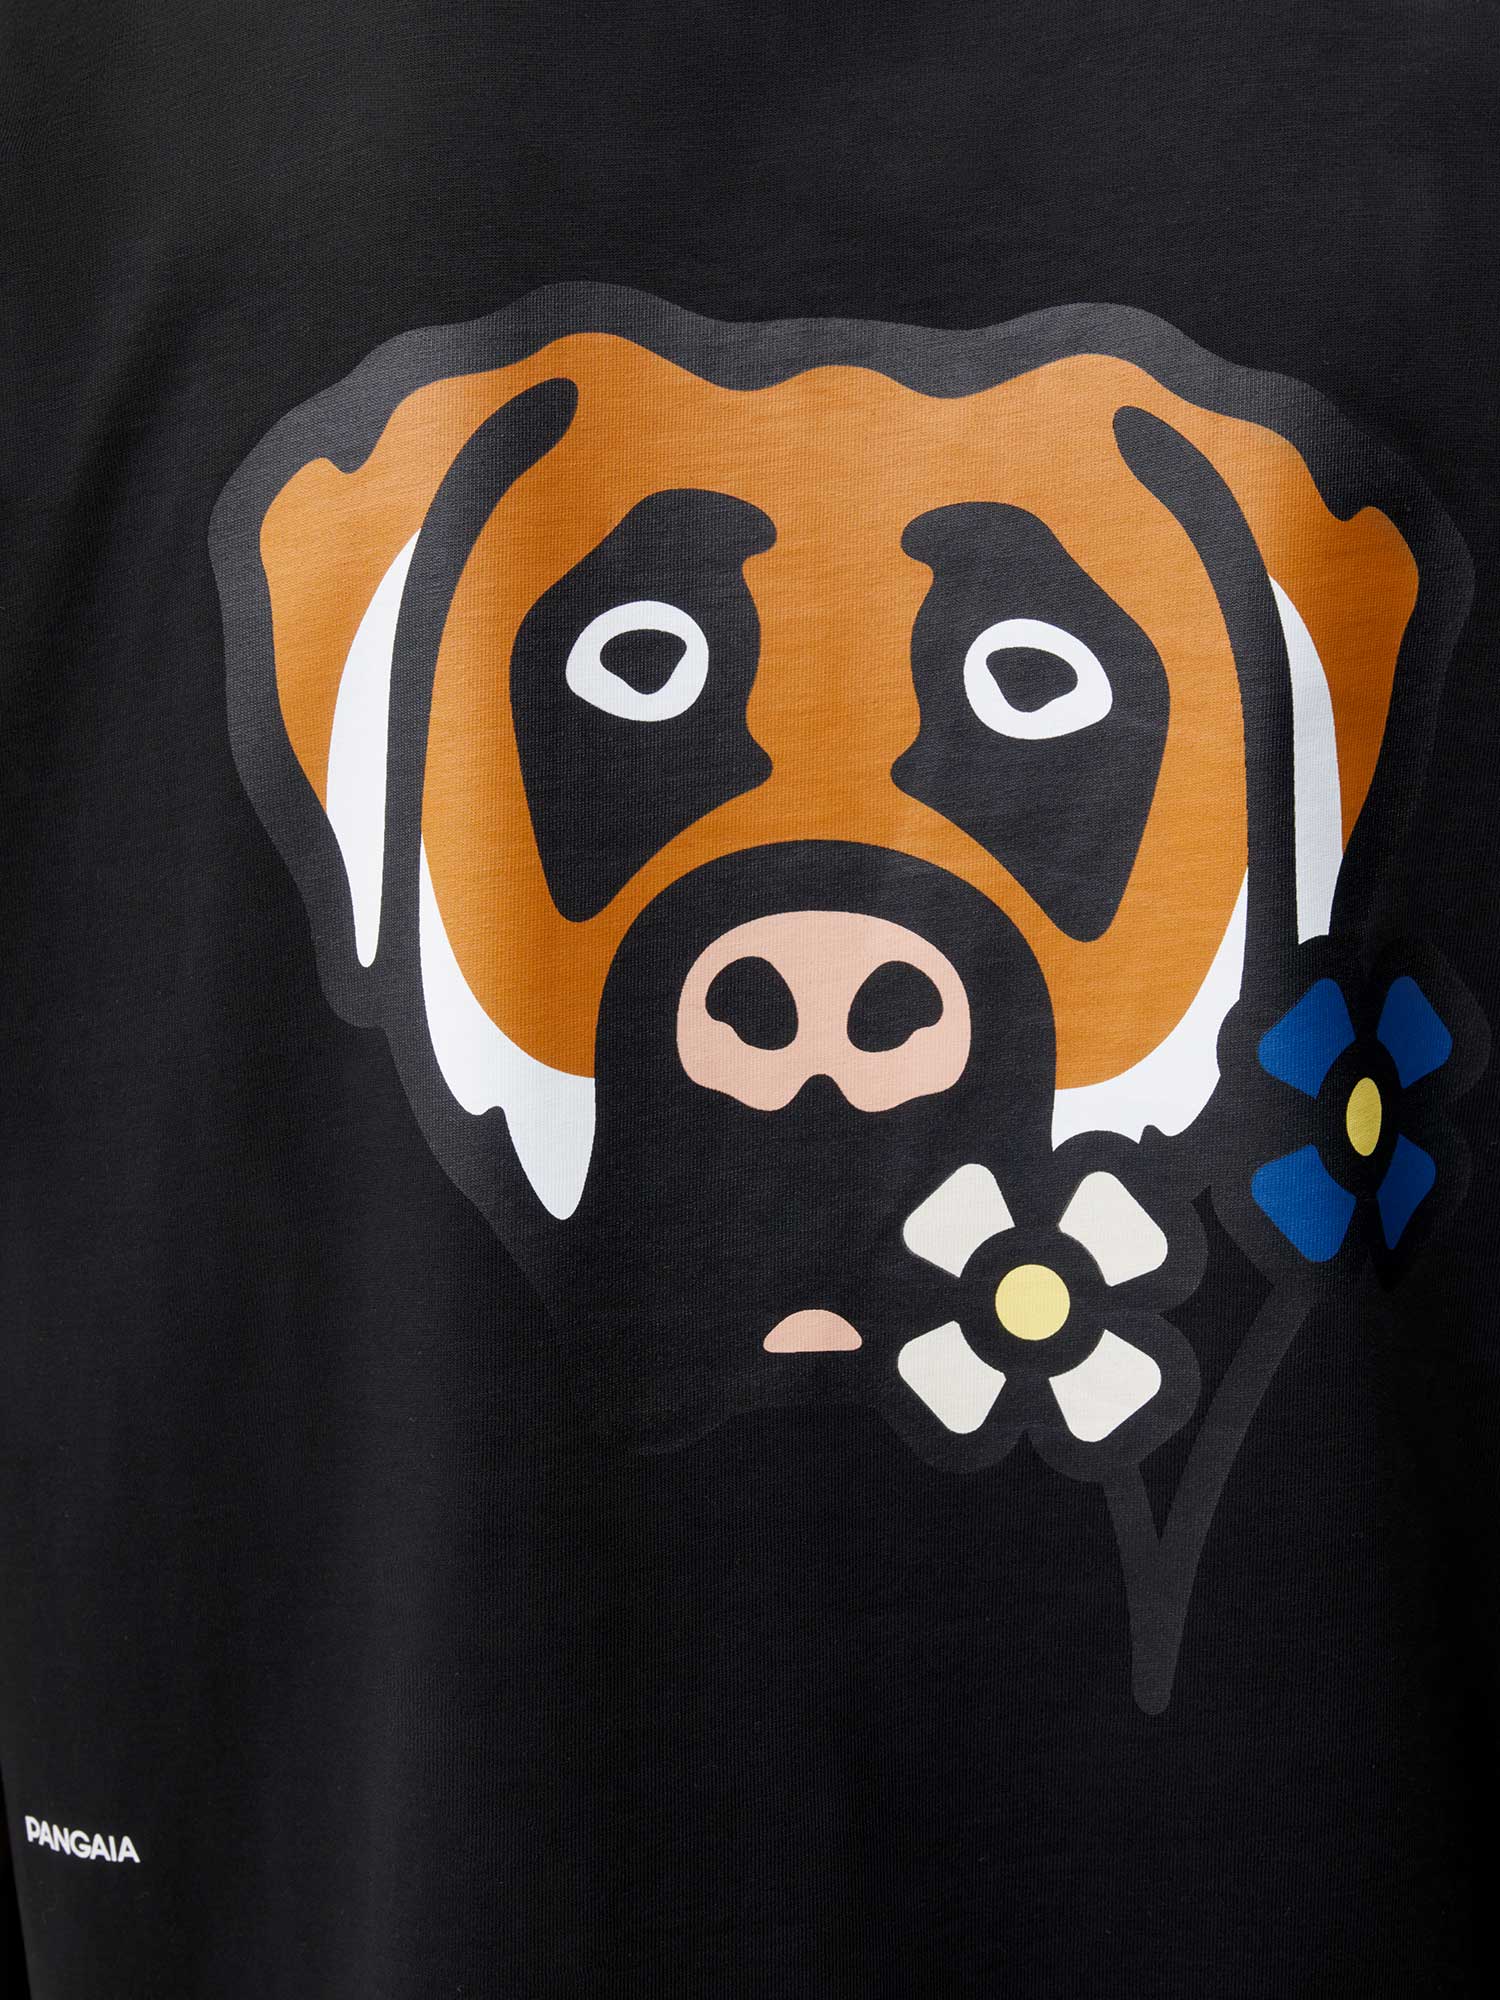 Pangaia-VictorVictor-Organic-Cotton-T-Shirt-Revised-Dog-Face-Black-Male-2